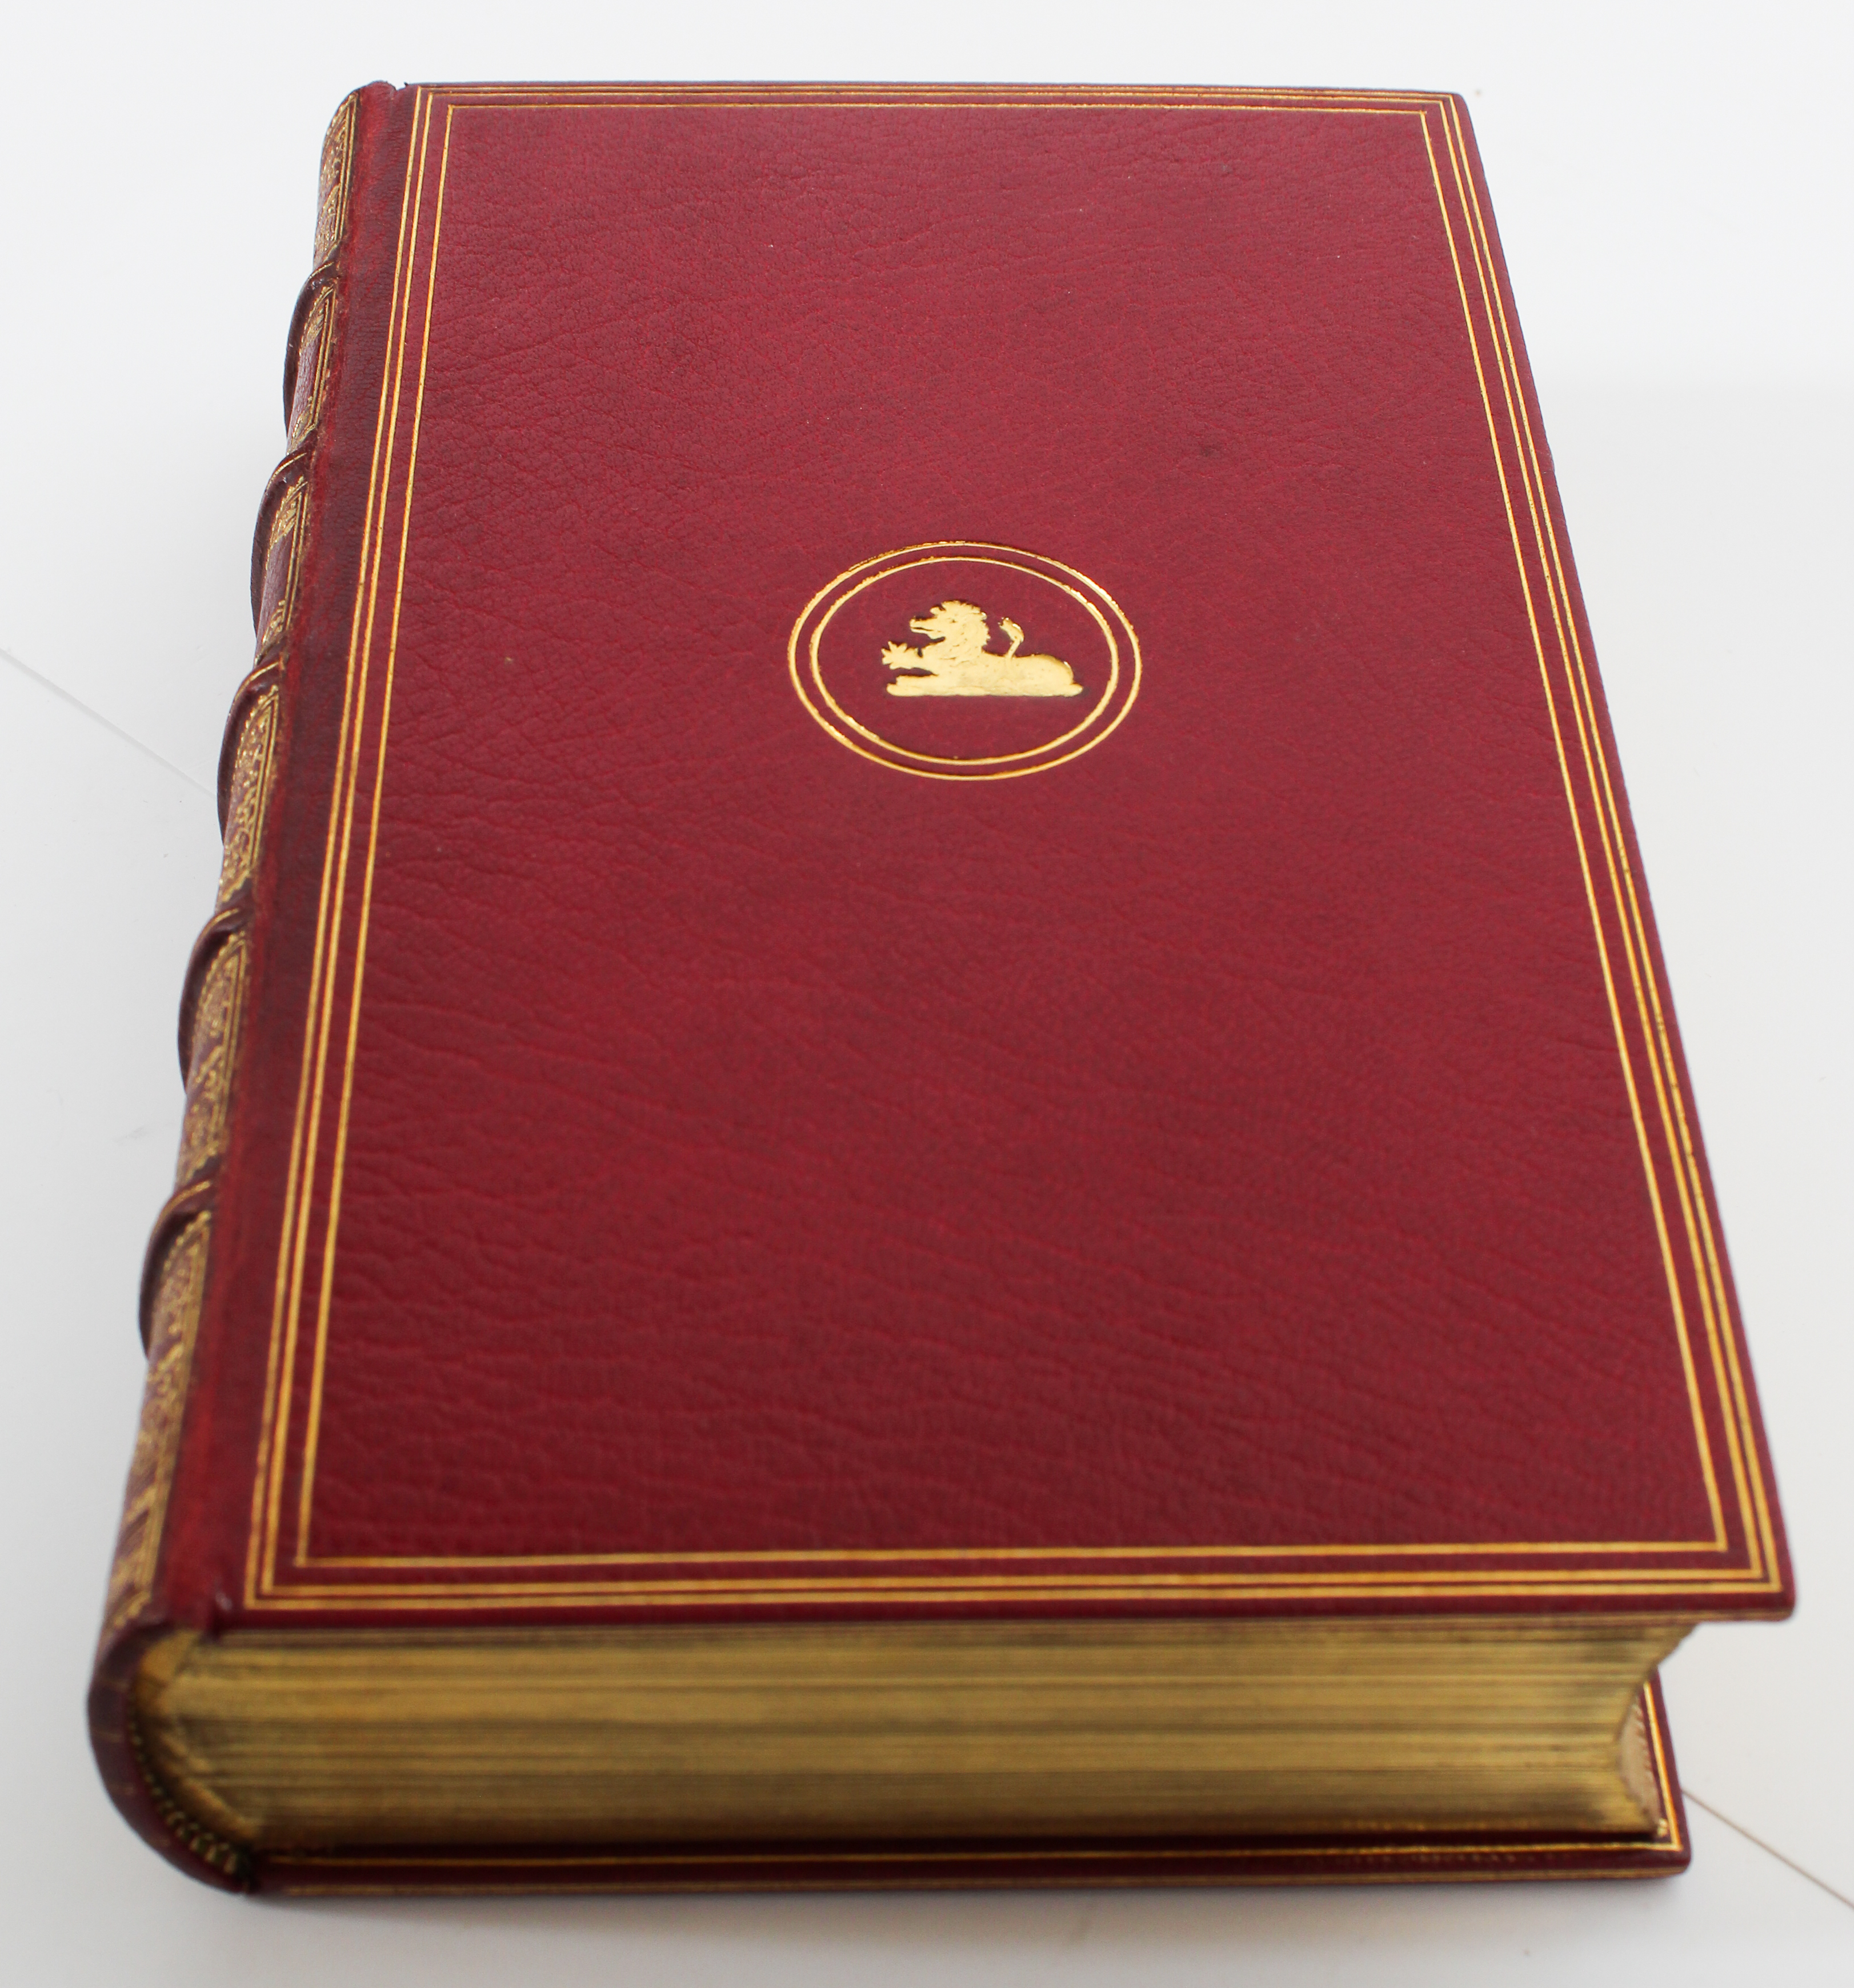 Charles Dickens, Dombey & Son, 1st Ed 1848 - Image 3 of 5